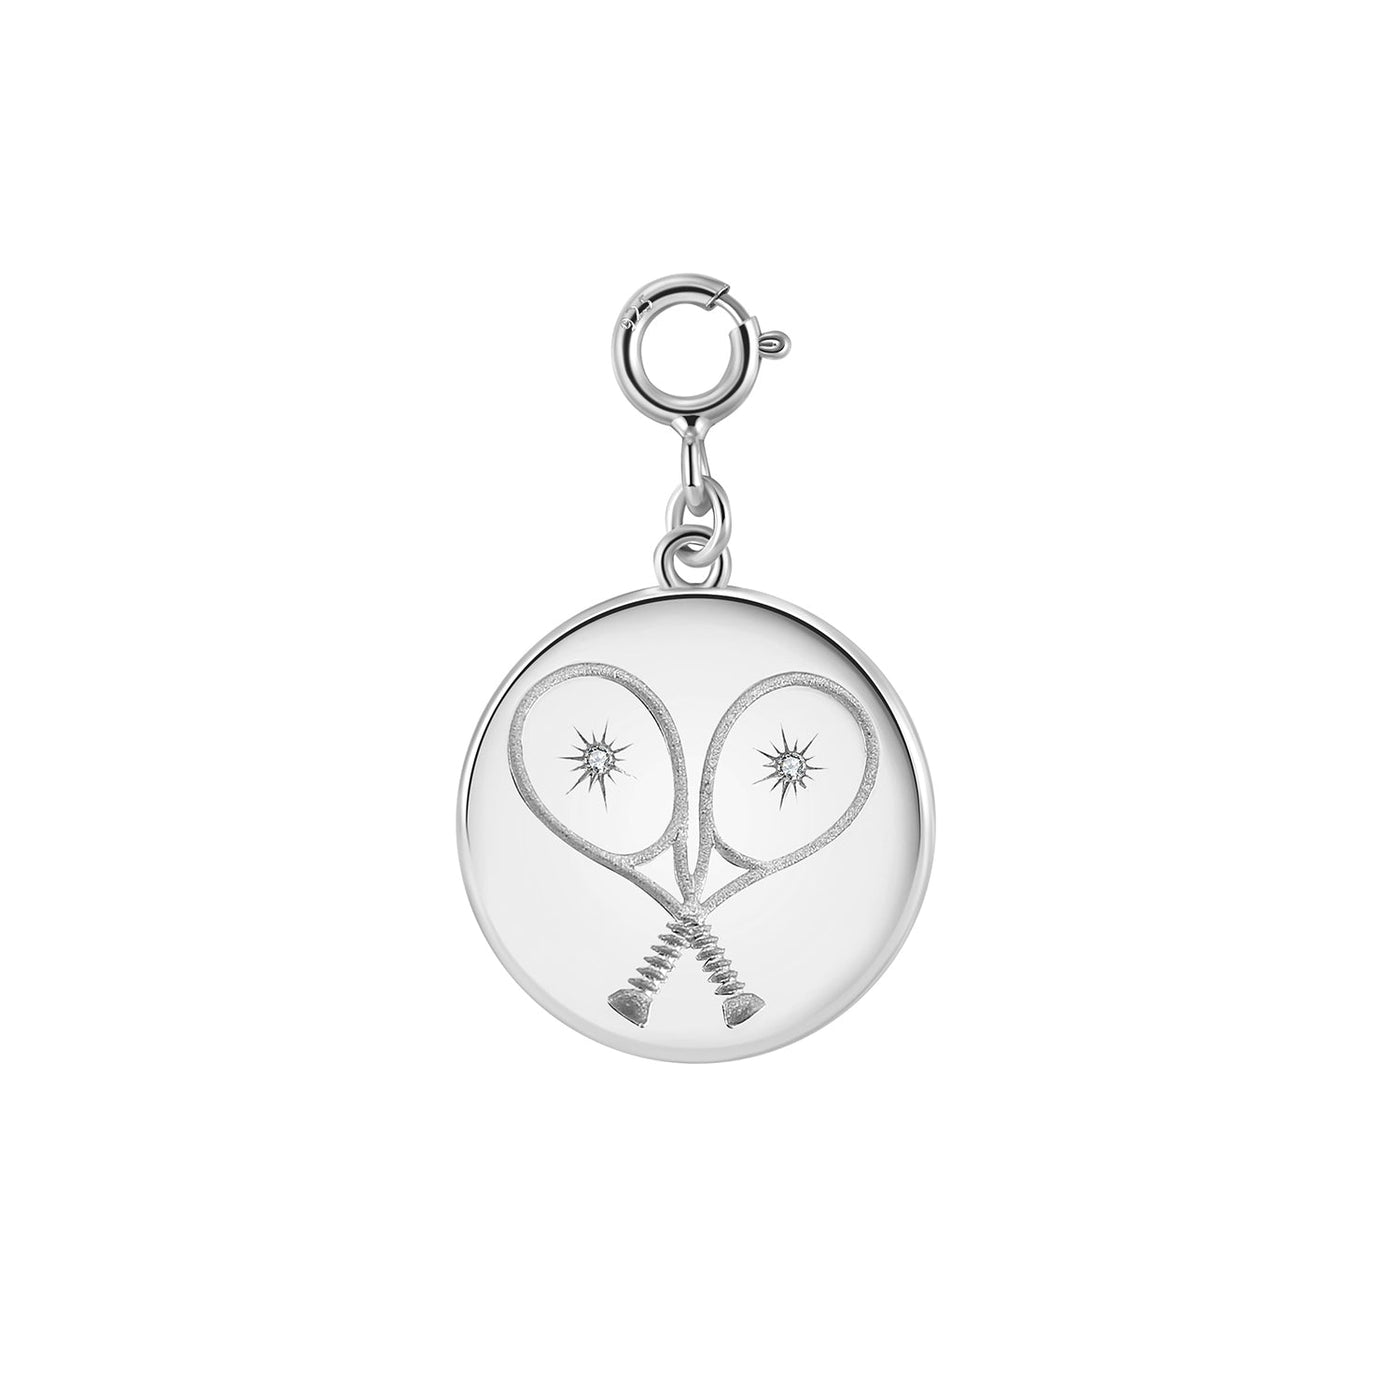 Chic Silver Tennis Heart Disc Pendant Charm featuring  double sided pendant charm with 2 racquets creating a 'heart' with impact crystal inside each and our LoveMatch insignia on the reverse with a sparkling crystal center. 